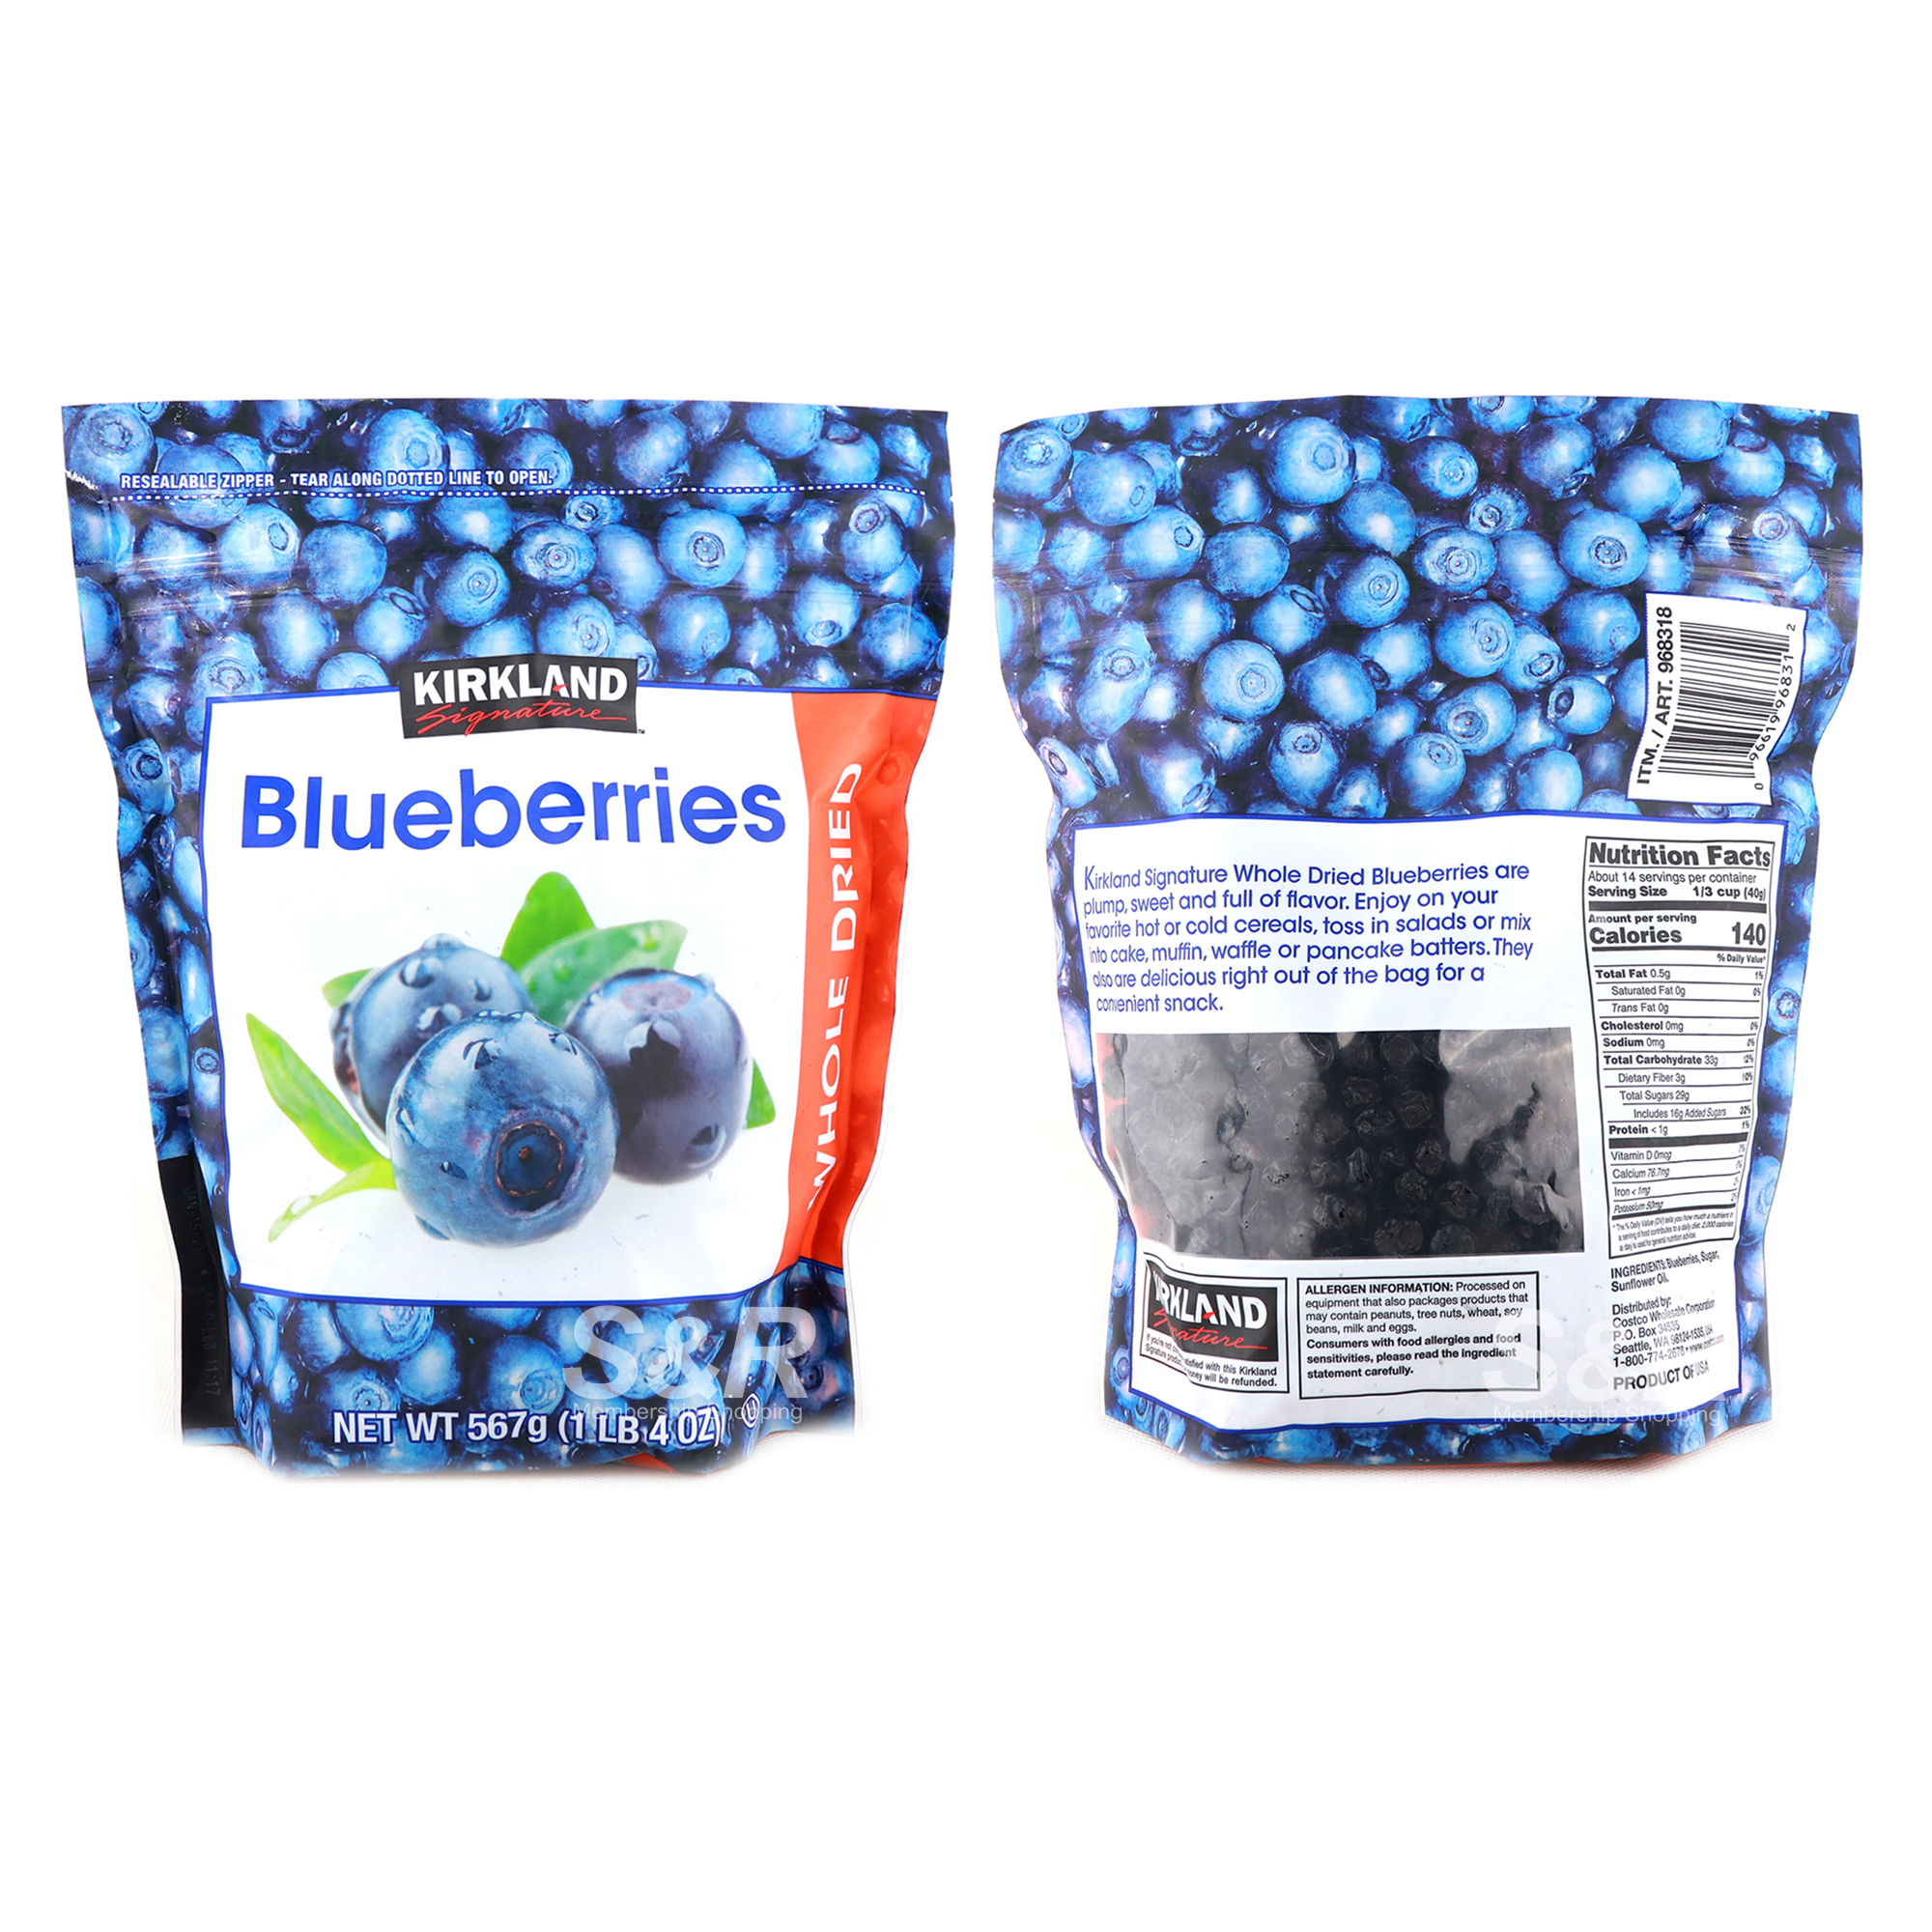 Whole Dried Blueberries